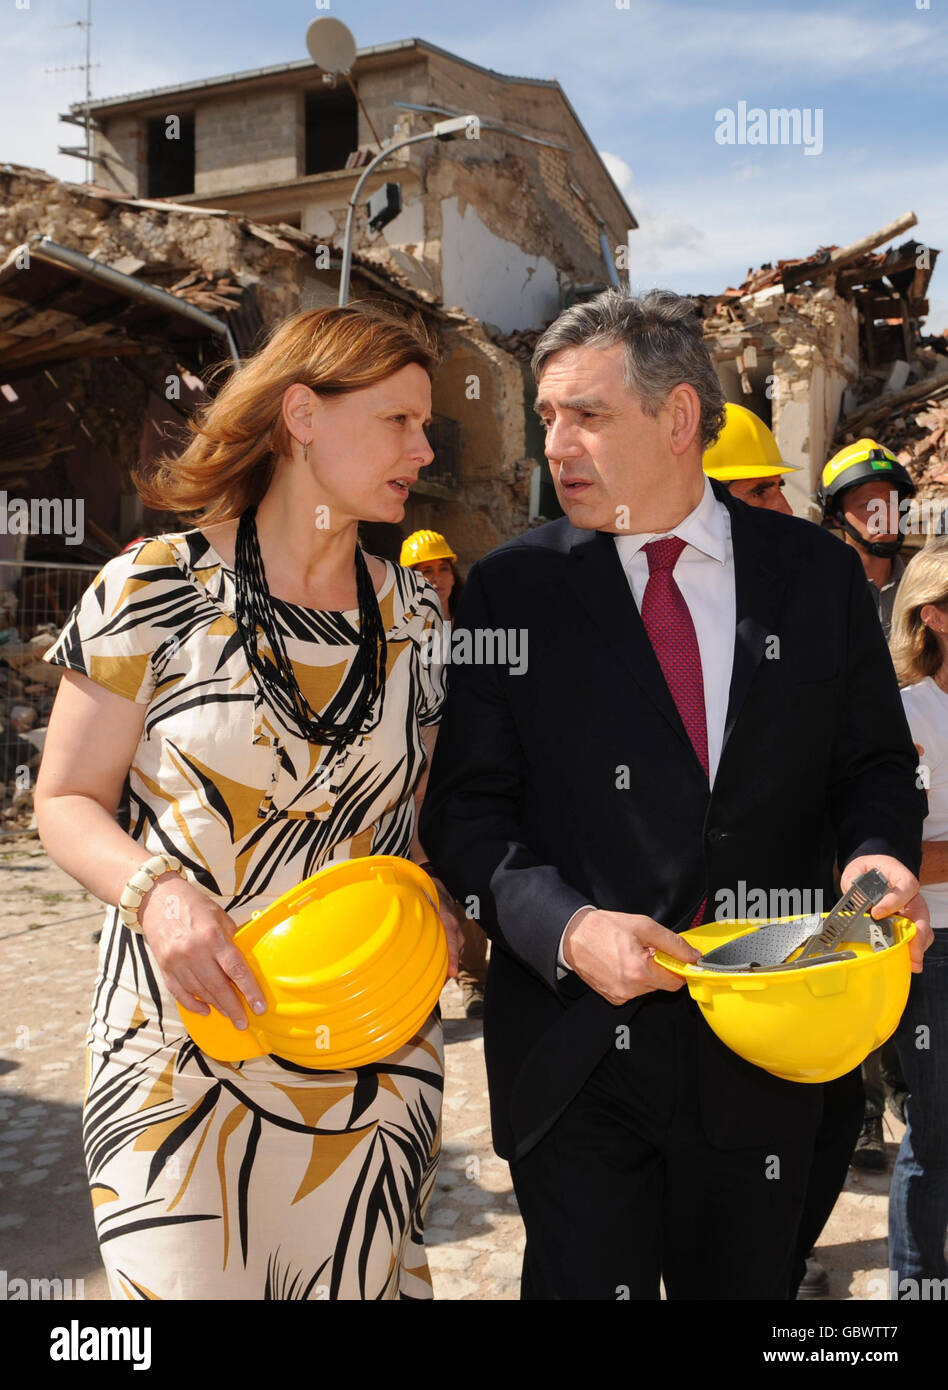 Prime Minister Gordon Brown (right) and his wife, Sarah Brown visit the ruined village of Onna near L'Aquila, Italy which was at the epicentre of the earthquake which struck the region on April 6, 2009. Stock Photo